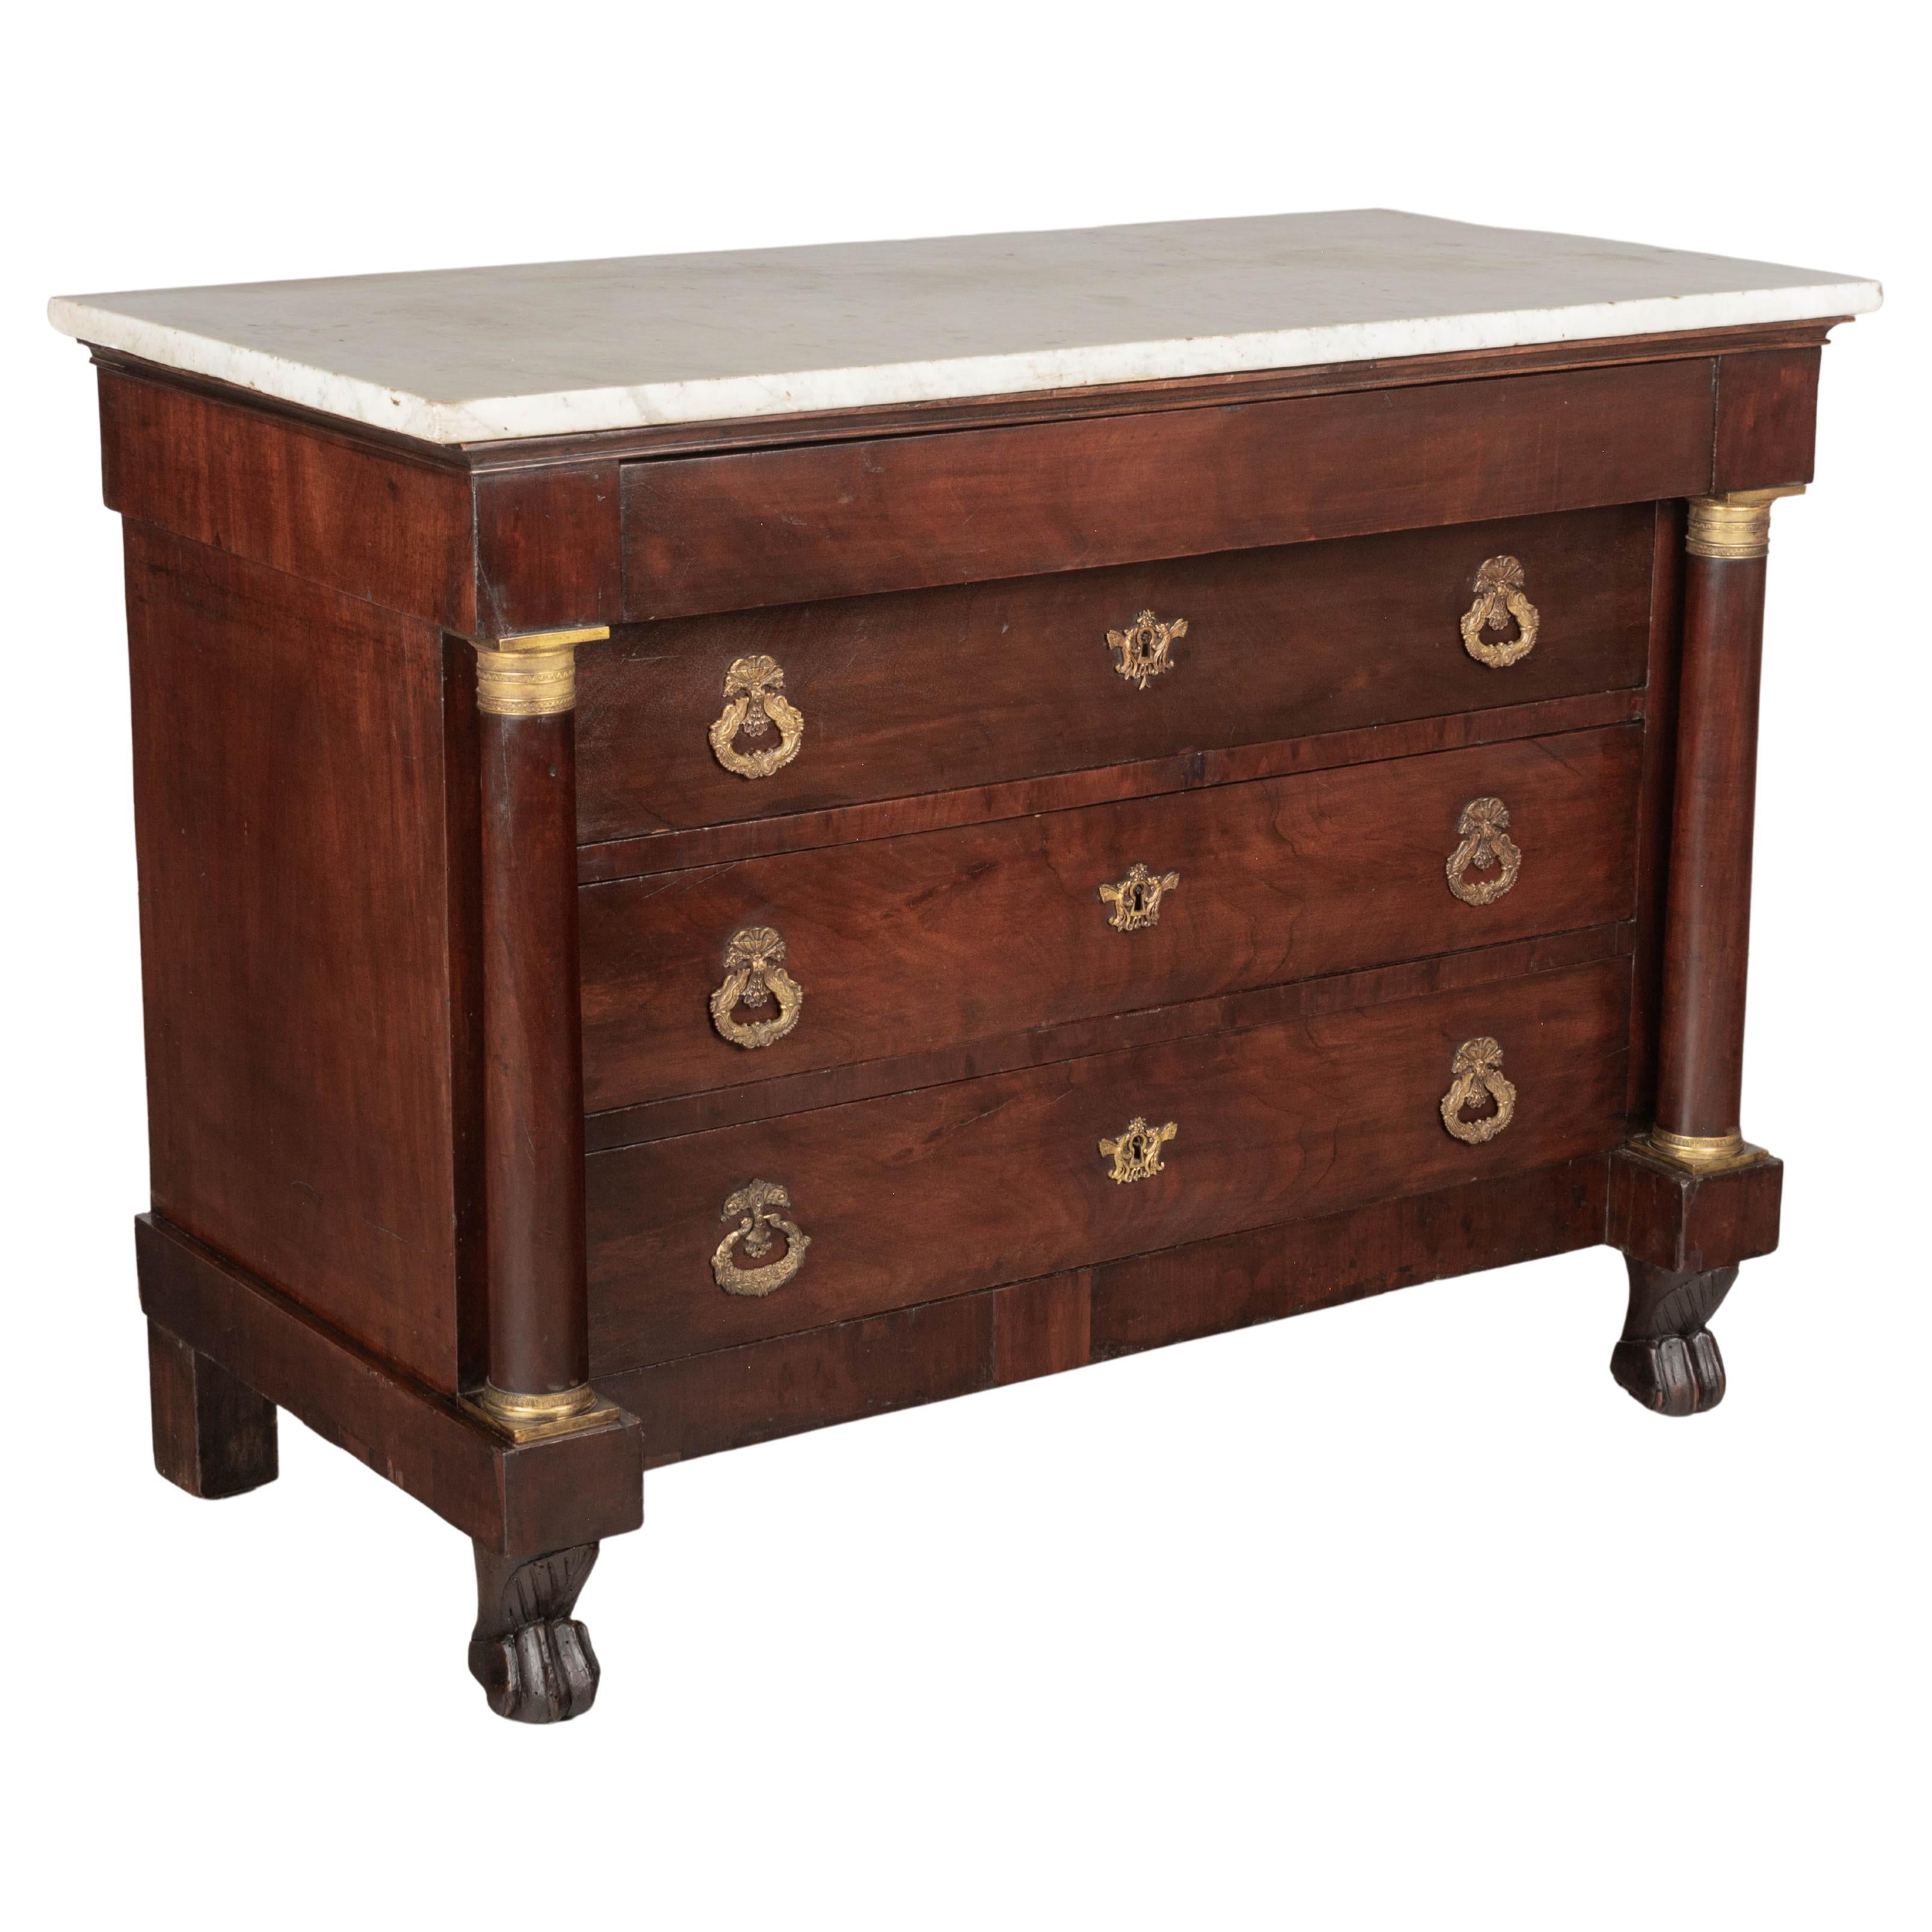 19th Century French Empire Commode or Chest of Drawers